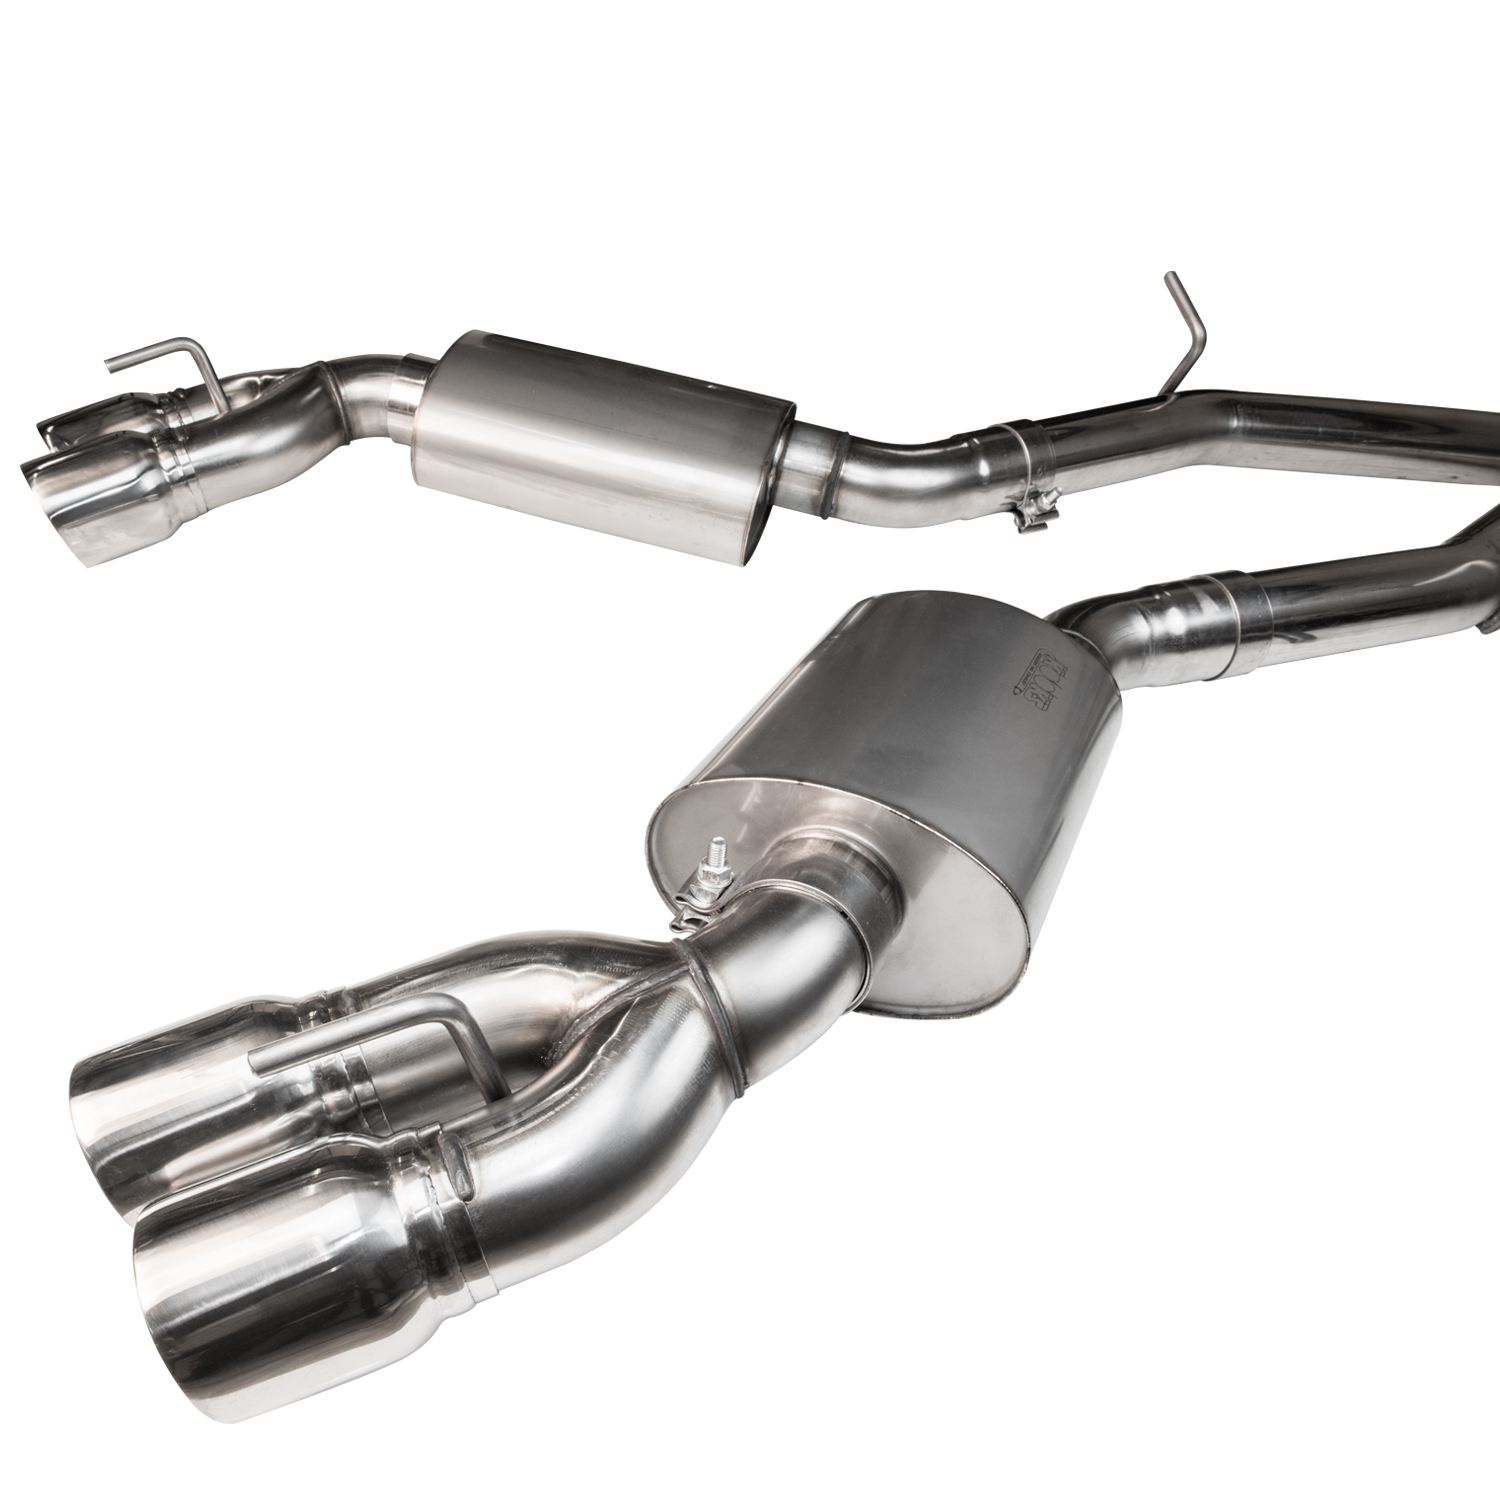 Complete 3" Exhaust System with Torca Tight Clamps Includes 3" Off-Road/No Cats Pipes X-Pipe Kooks Oval Race Mufflers And 4" Pol